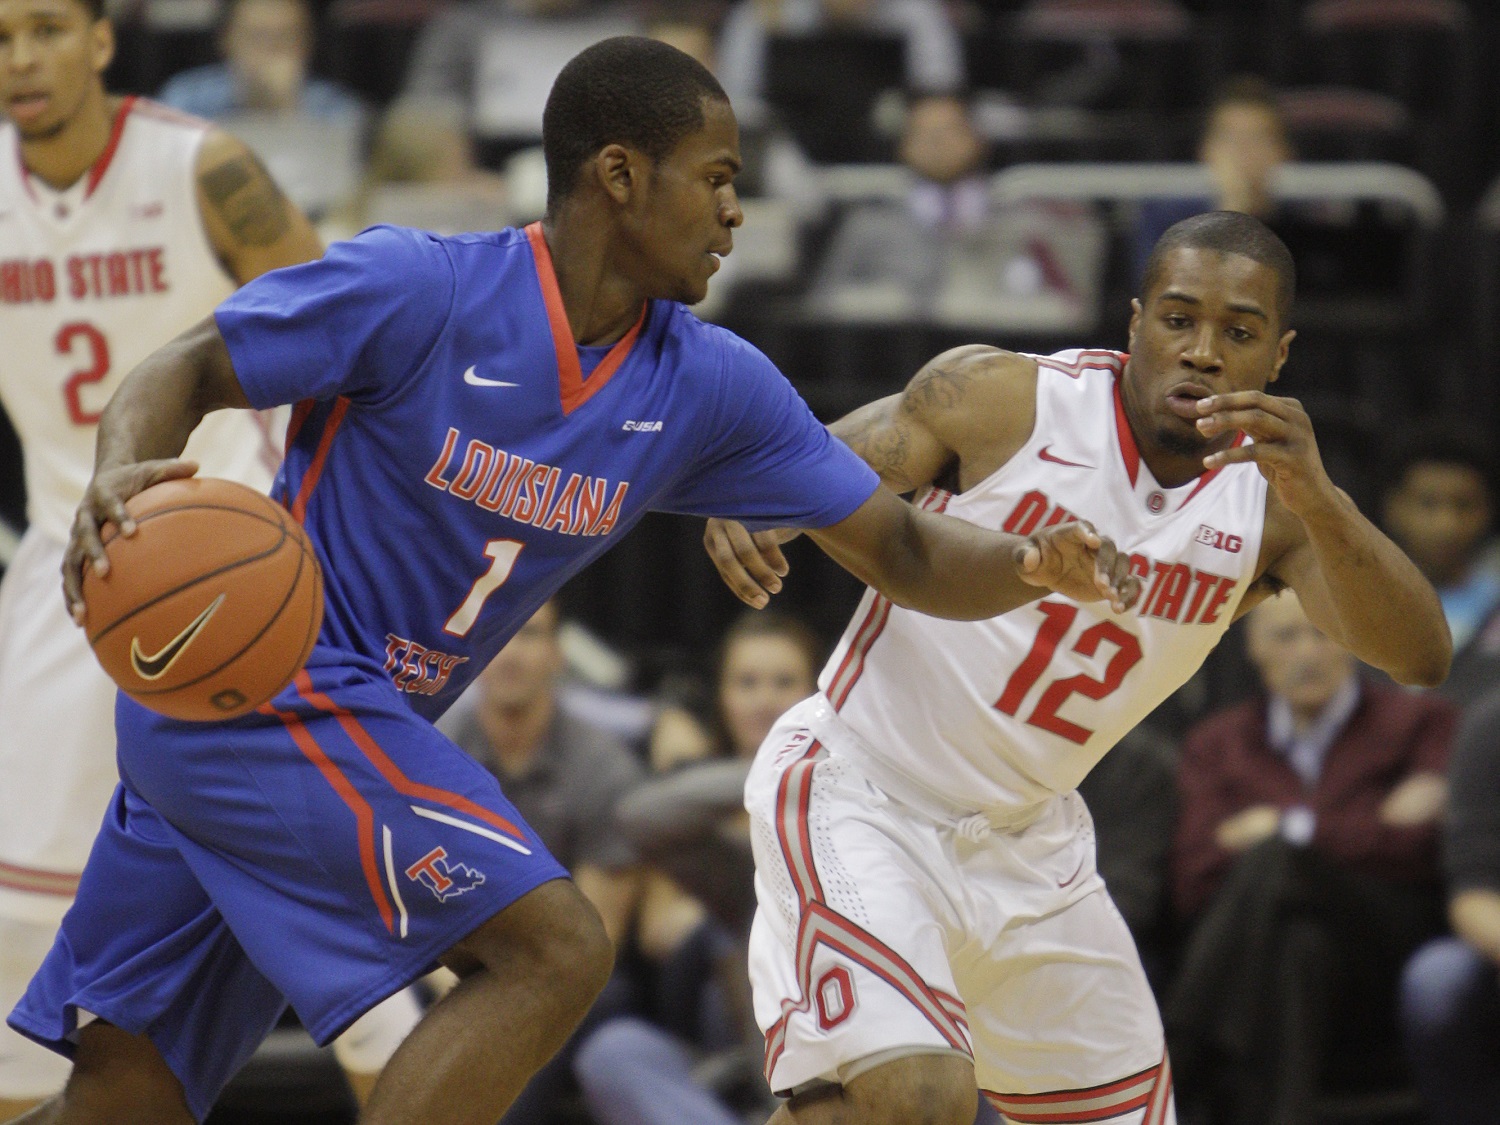 Louisiana Tech's Derric Jean (1)  tries to dribble past Ohio State's A.J. Harris (12) during the first half of an NCAA college basketball game Tuesday, Nov. 24, 2015, in Columbus, Ohio. (AP Photo/Jay LaPrete)